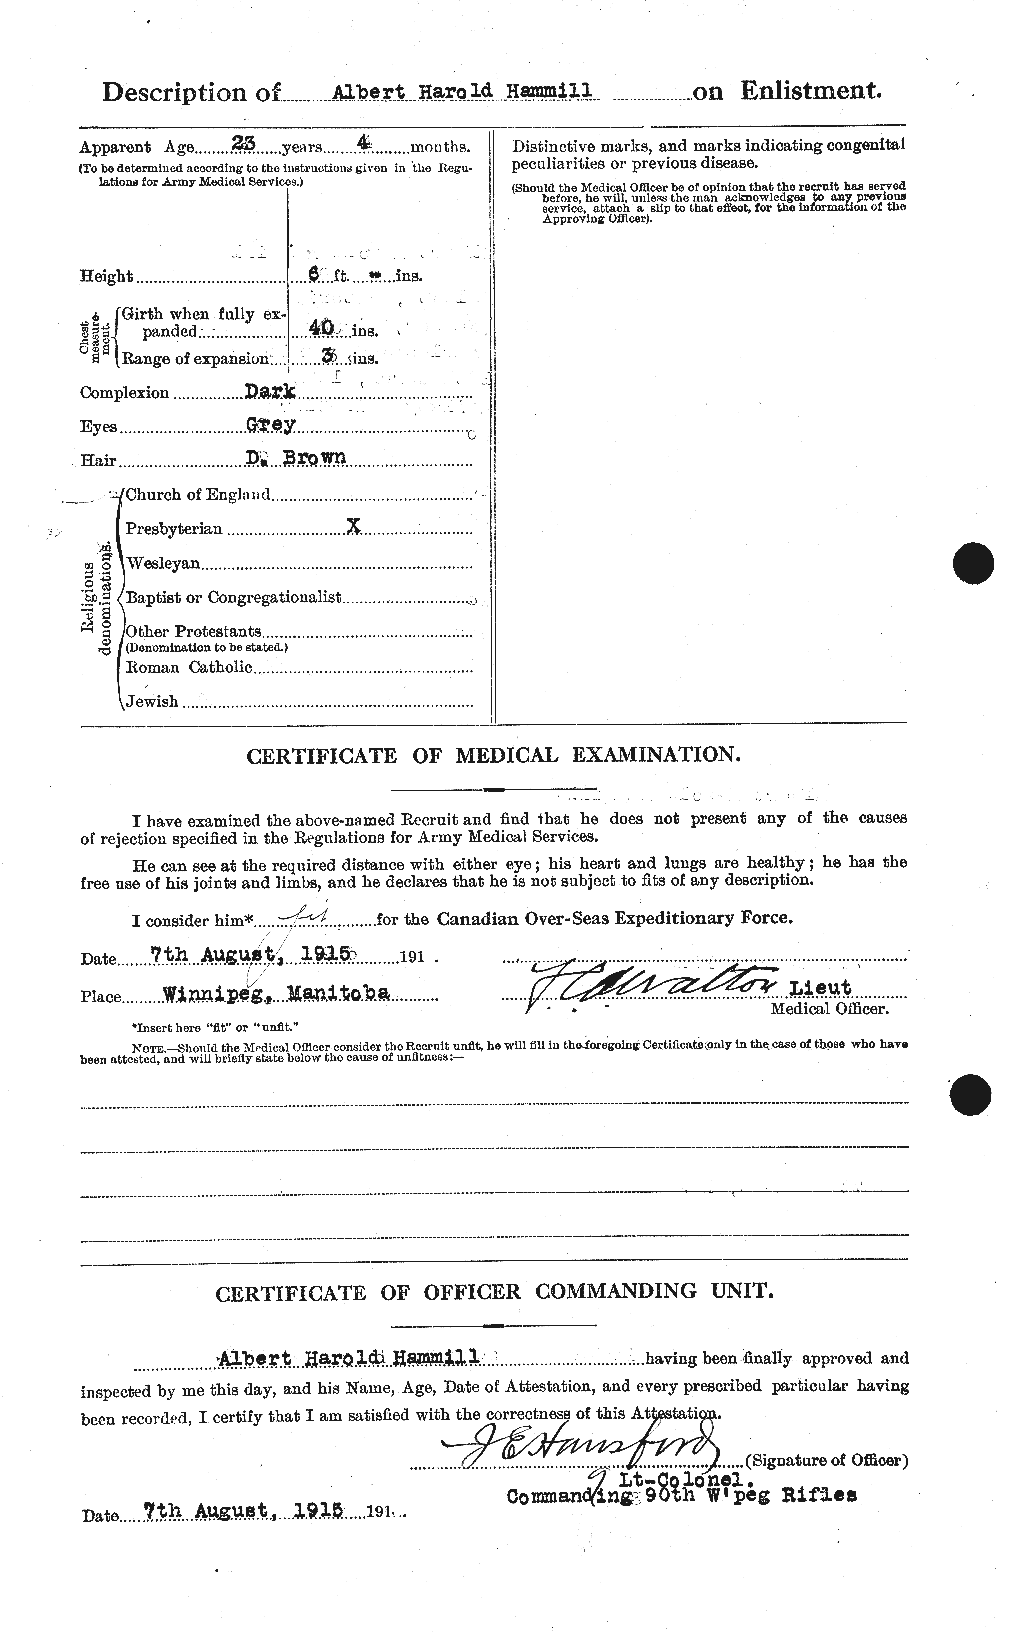 Personnel Records of the First World War - CEF 376297b